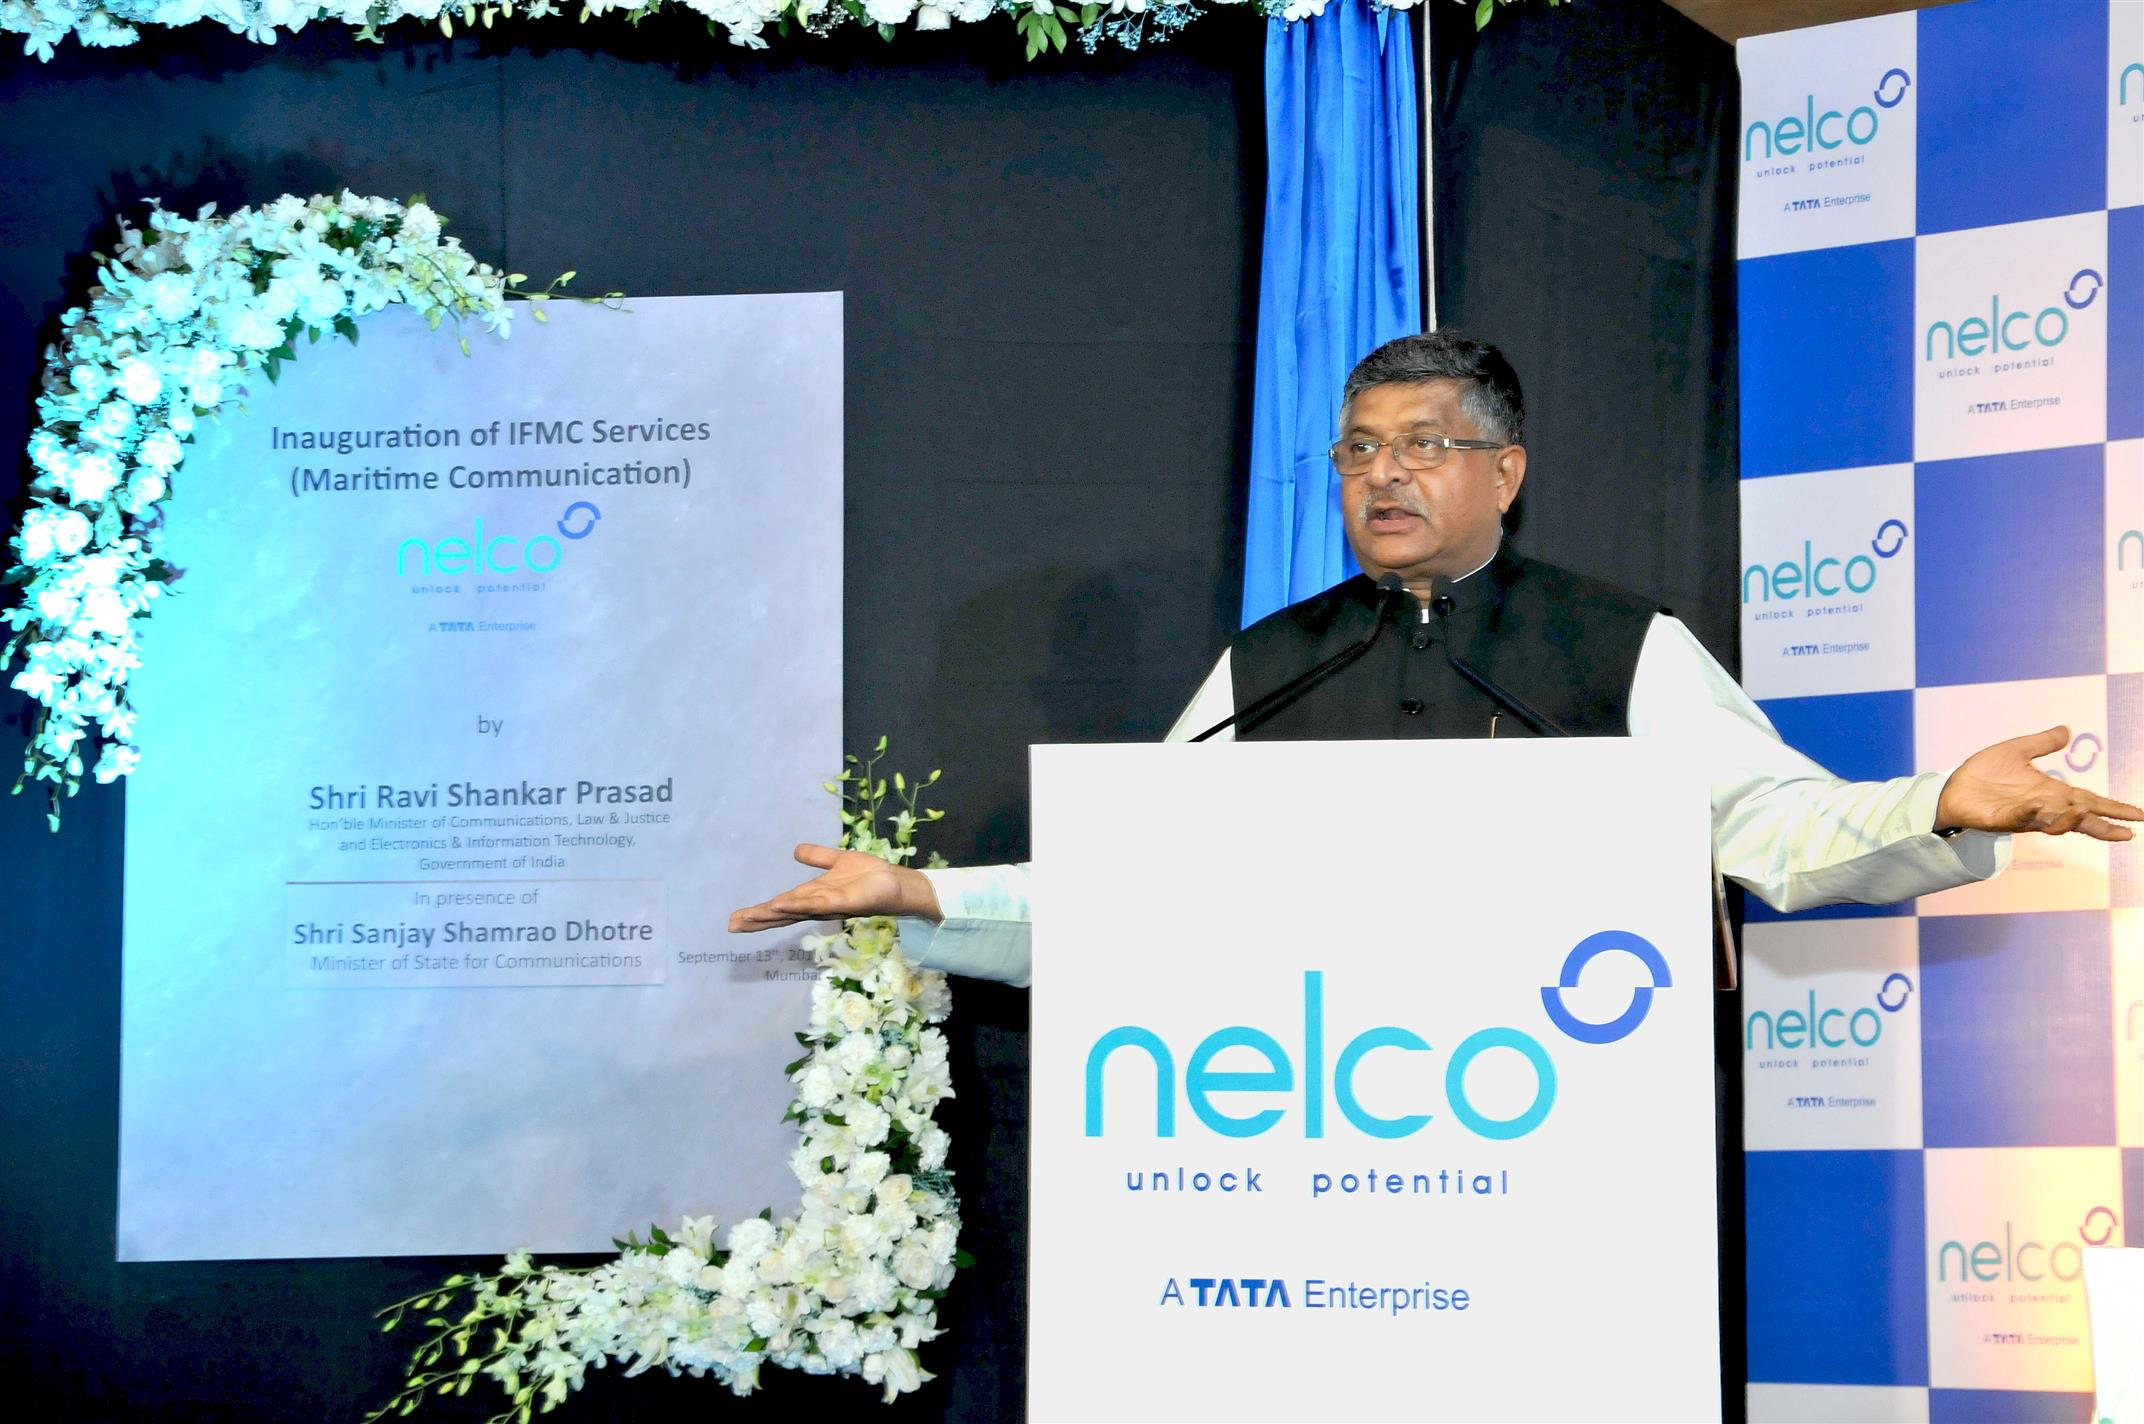 Union Minister for IT and Communication, Law and Justice and Electronics Shri Ravi Shankar Prasad addressing at inauguration of  Maritime Telecommunication Service & Pilot Project in Maharashtra for Tracing stolen mobiles in Mumbai on September 13, 2019. MoS for Communication Shri Sanjay Shamrao Dhotre also present.